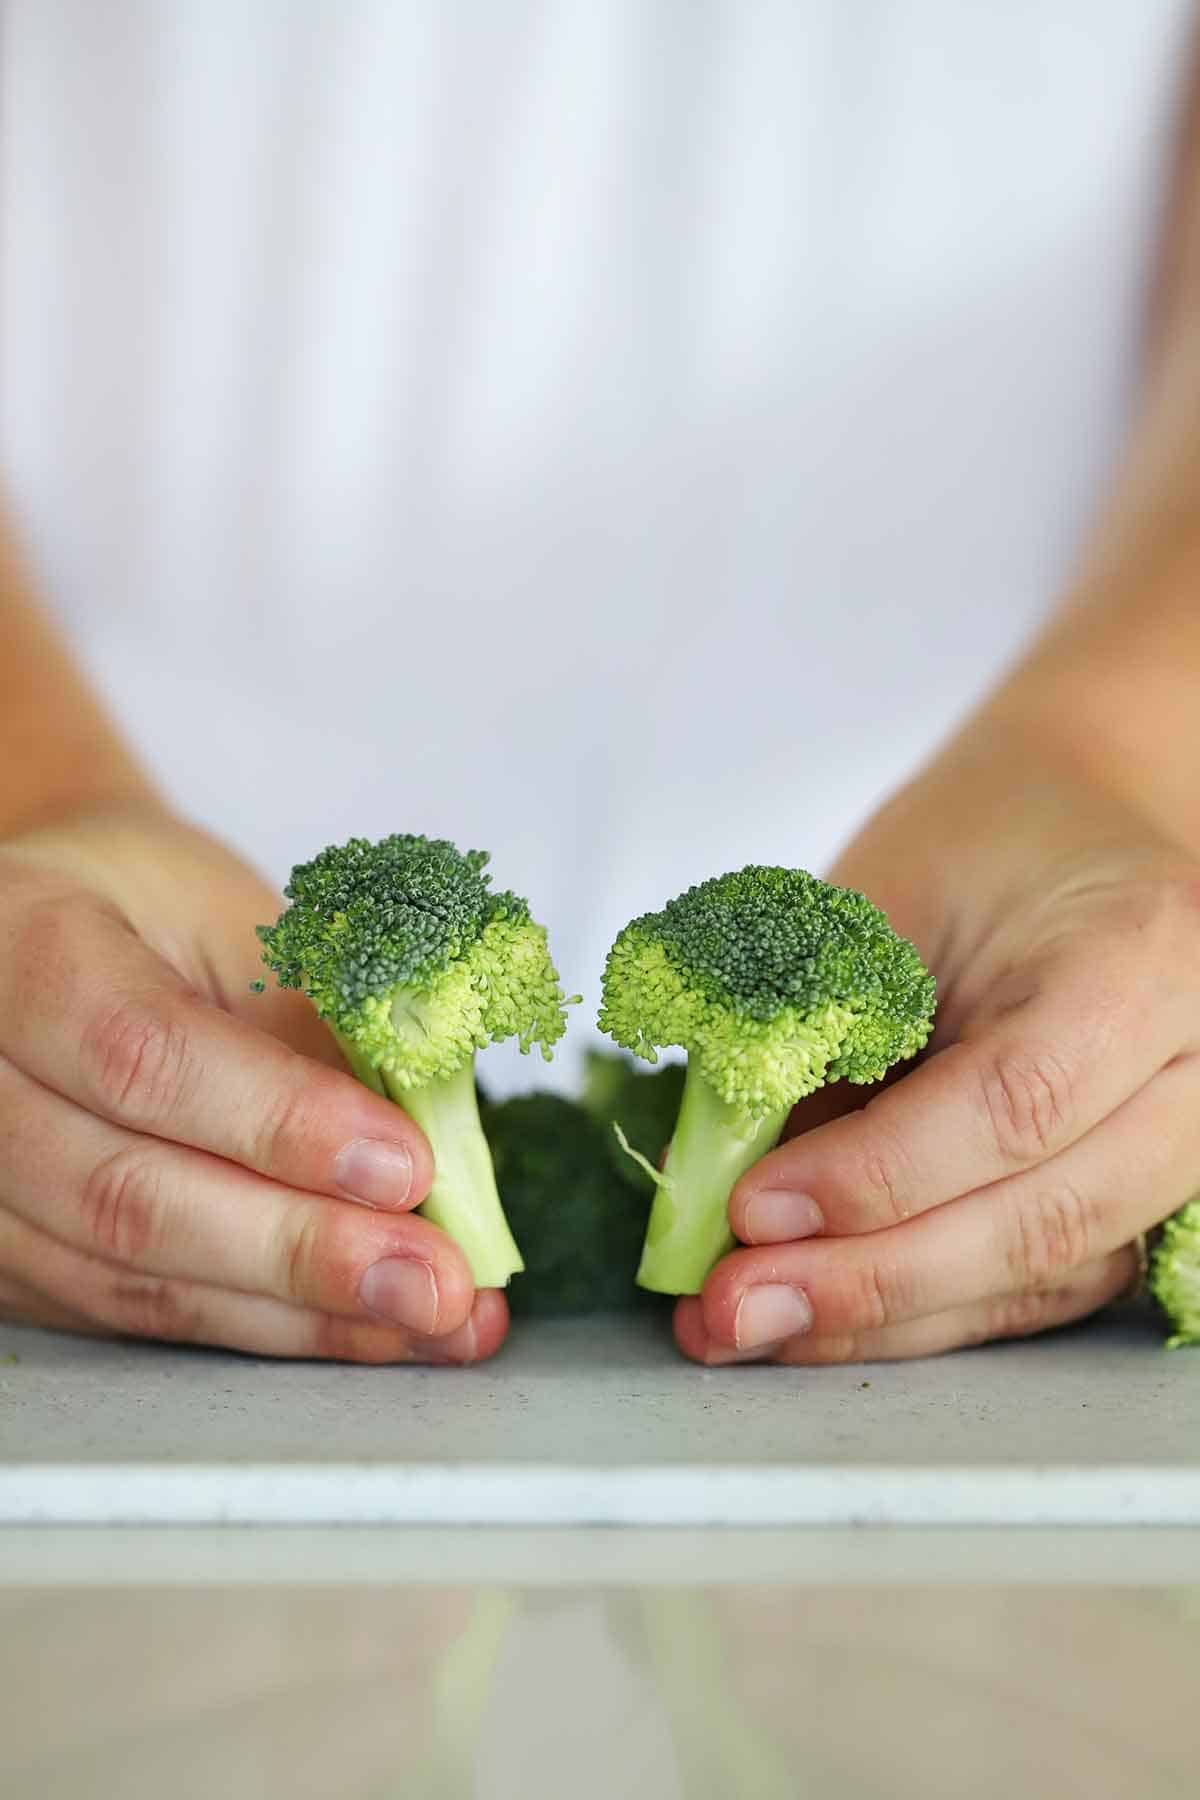 Two large florets of broccoli being held.